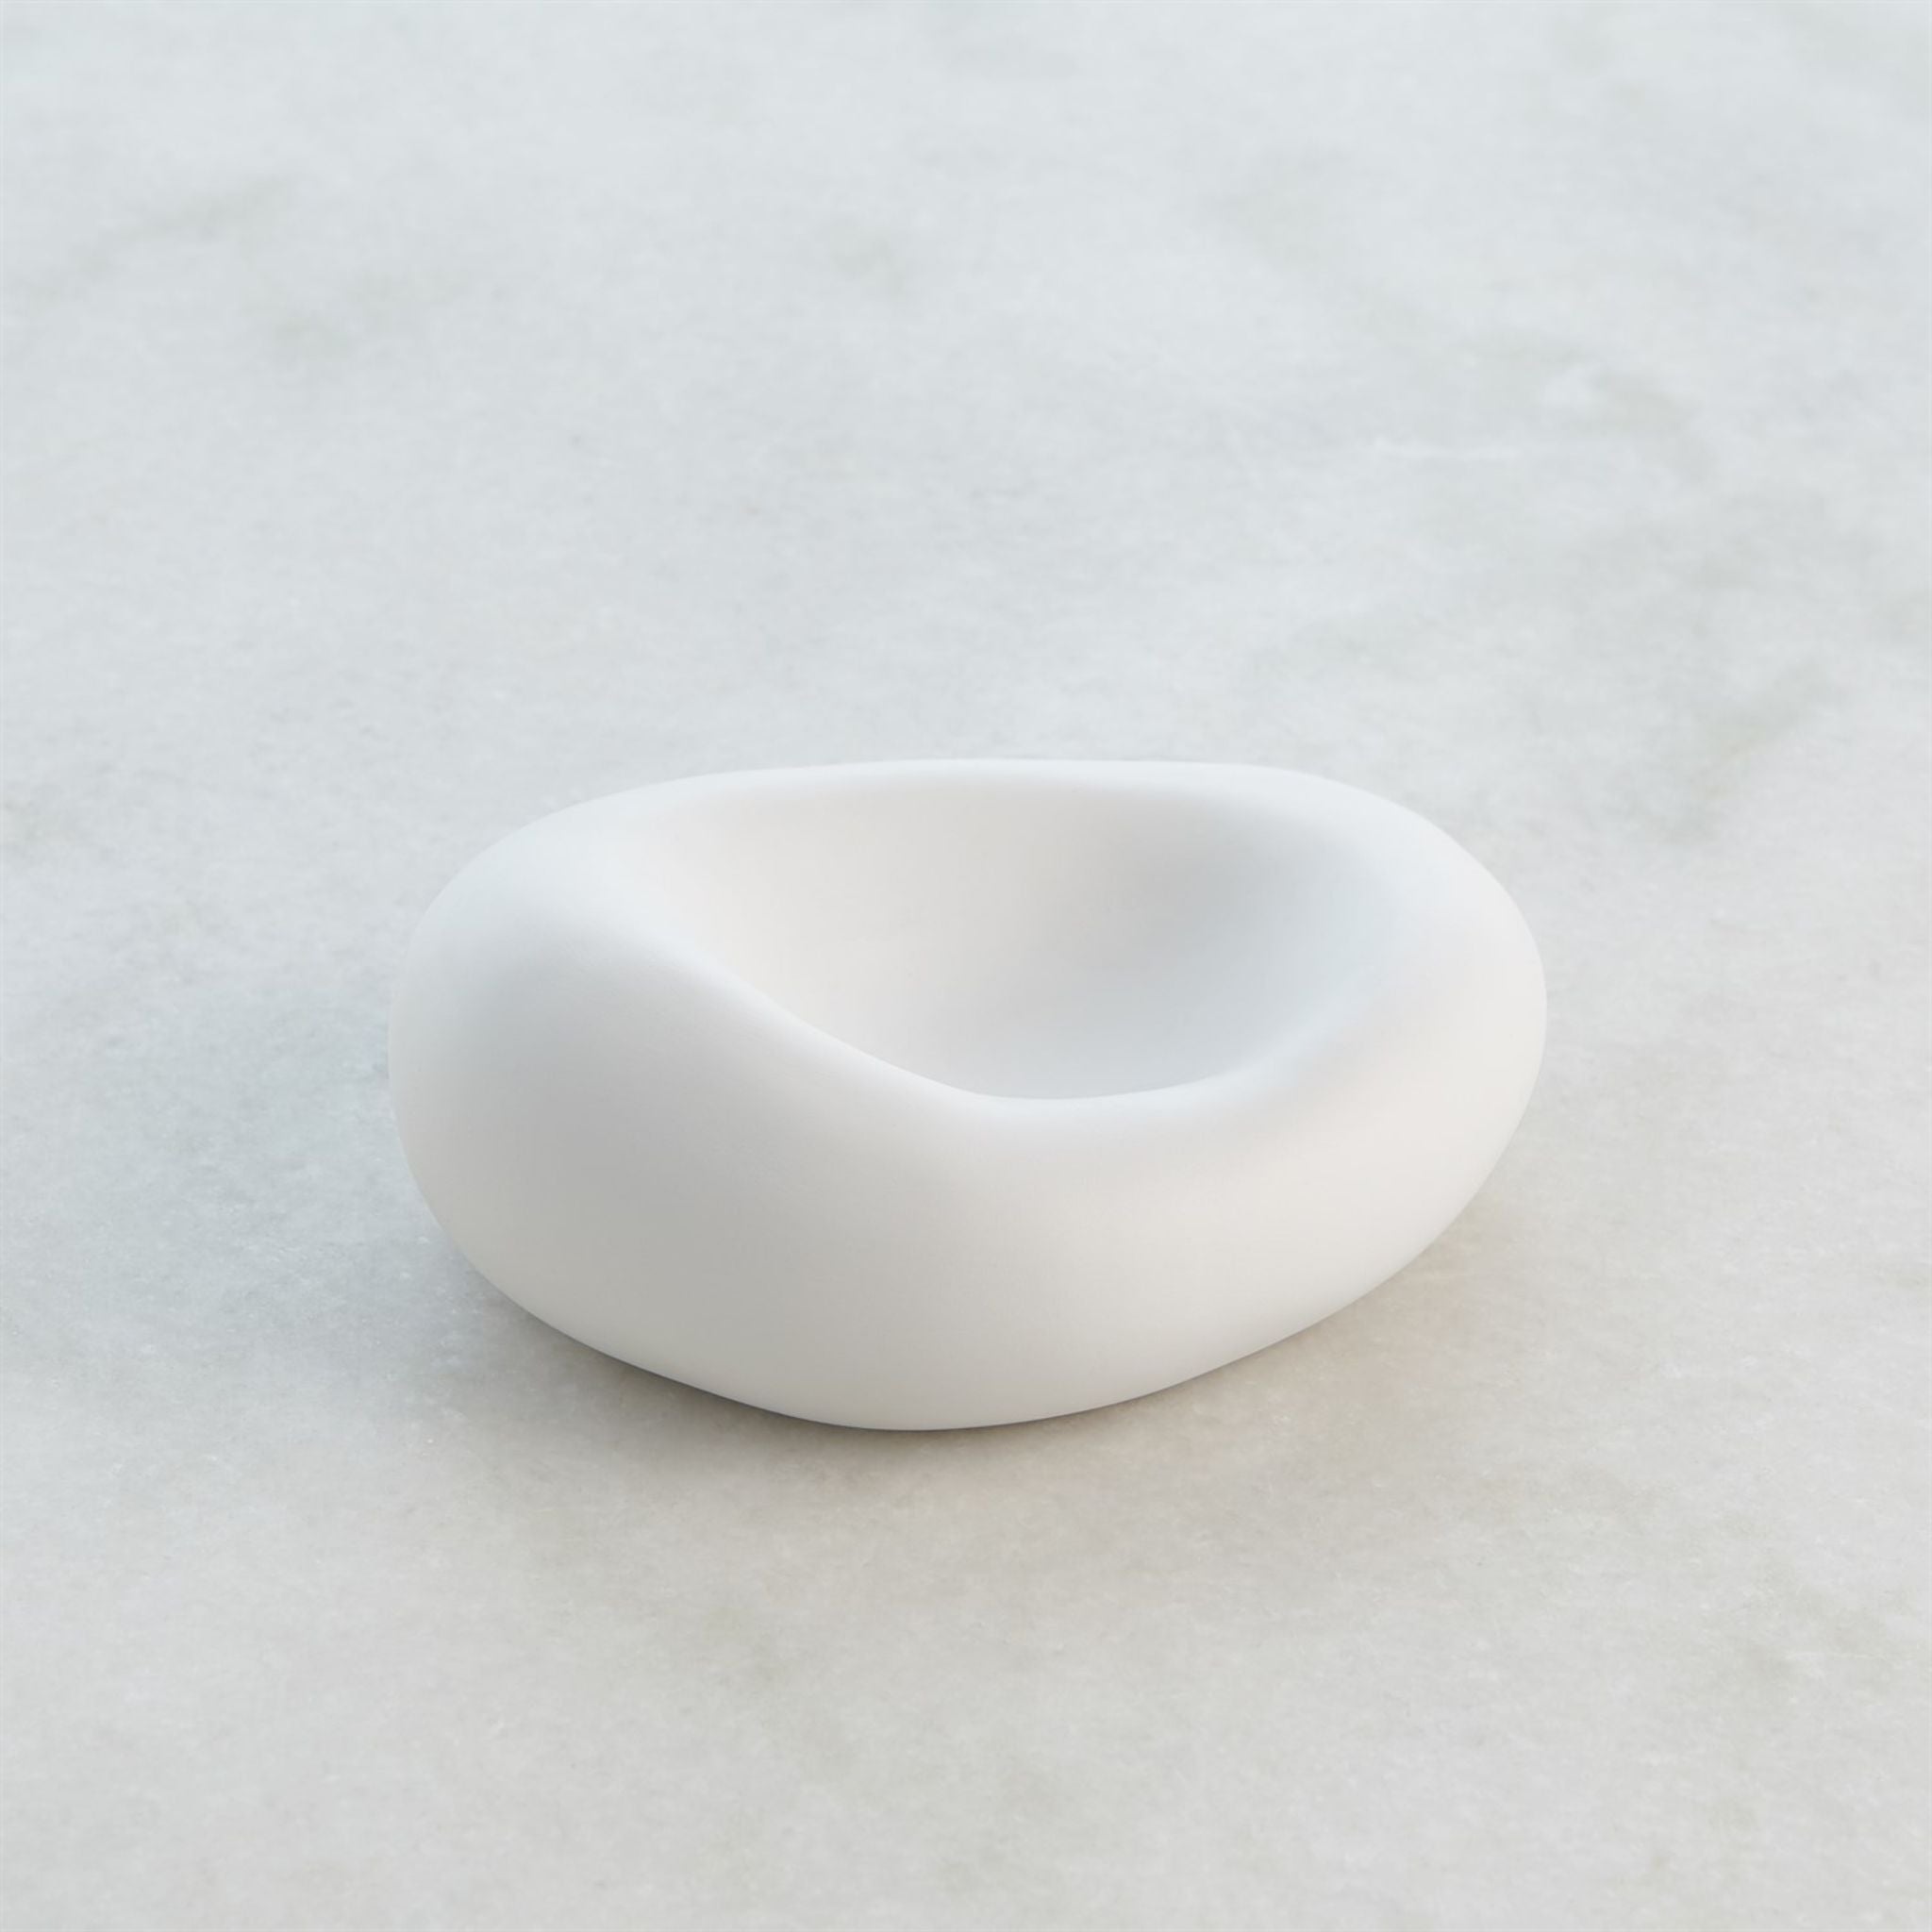 SIMPLY ELEVATED - Crafted in Italy, these organic shaped ceramic bowls have a matte white finish and available in two sizes.